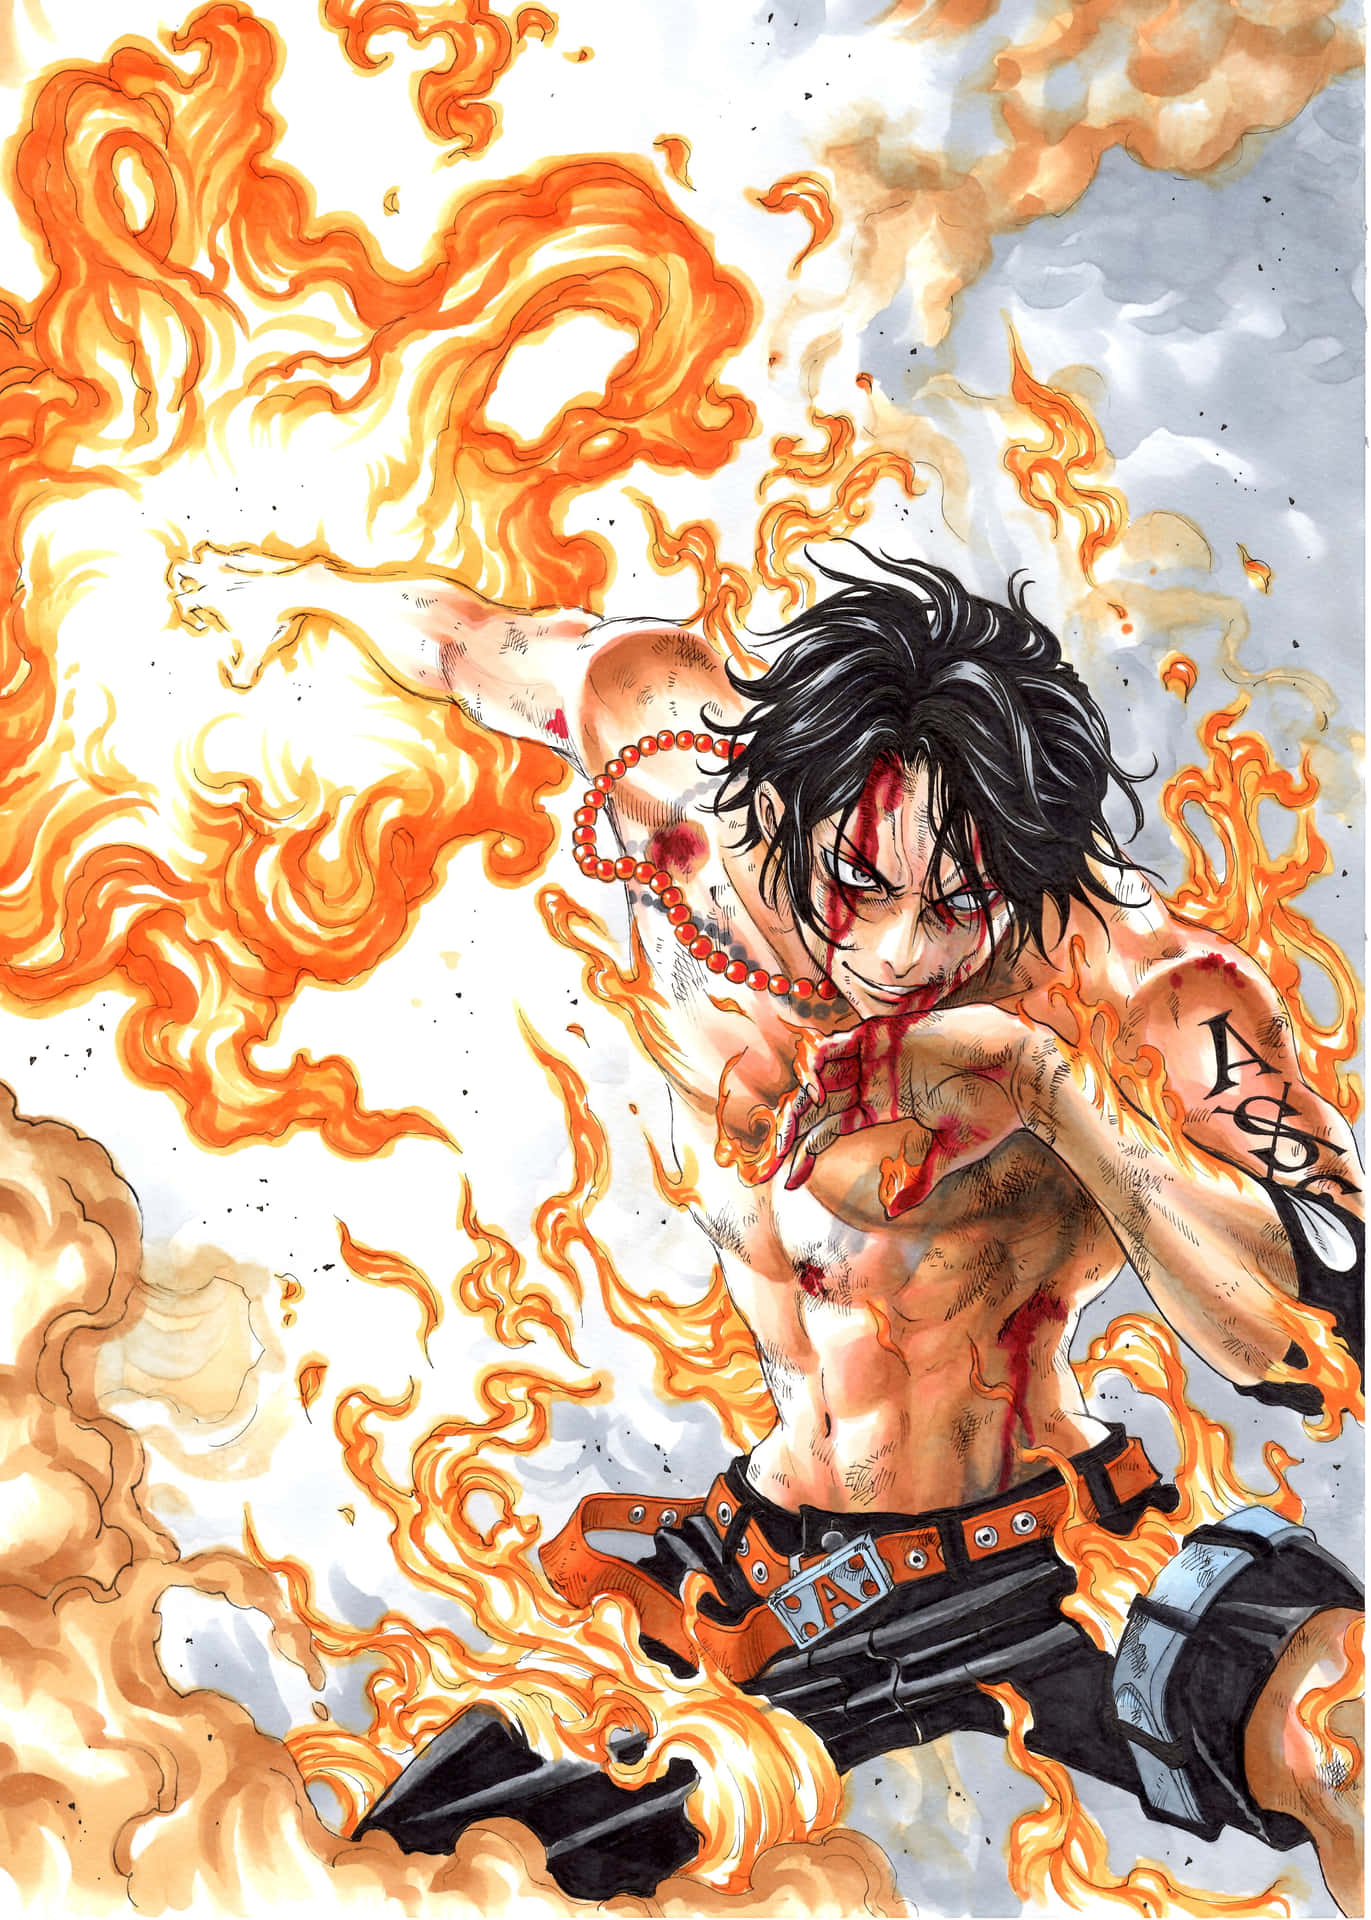 Anime Stretching Arm With Fire Wallpaper